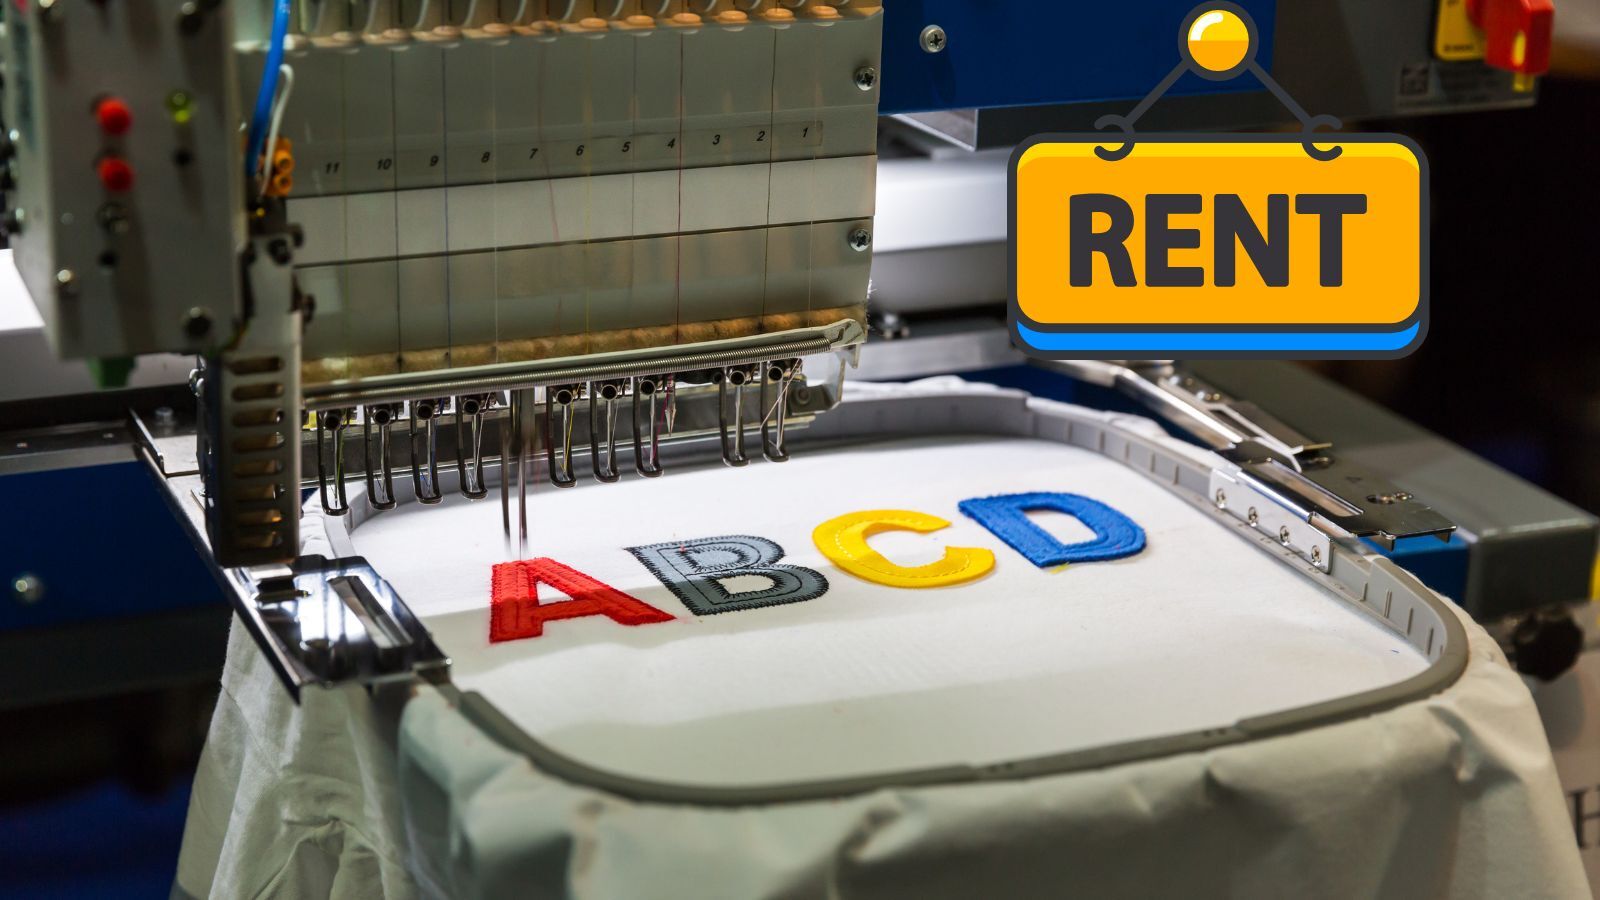 Embroidery Machine Rental: Where Is the Best Place to Rental?